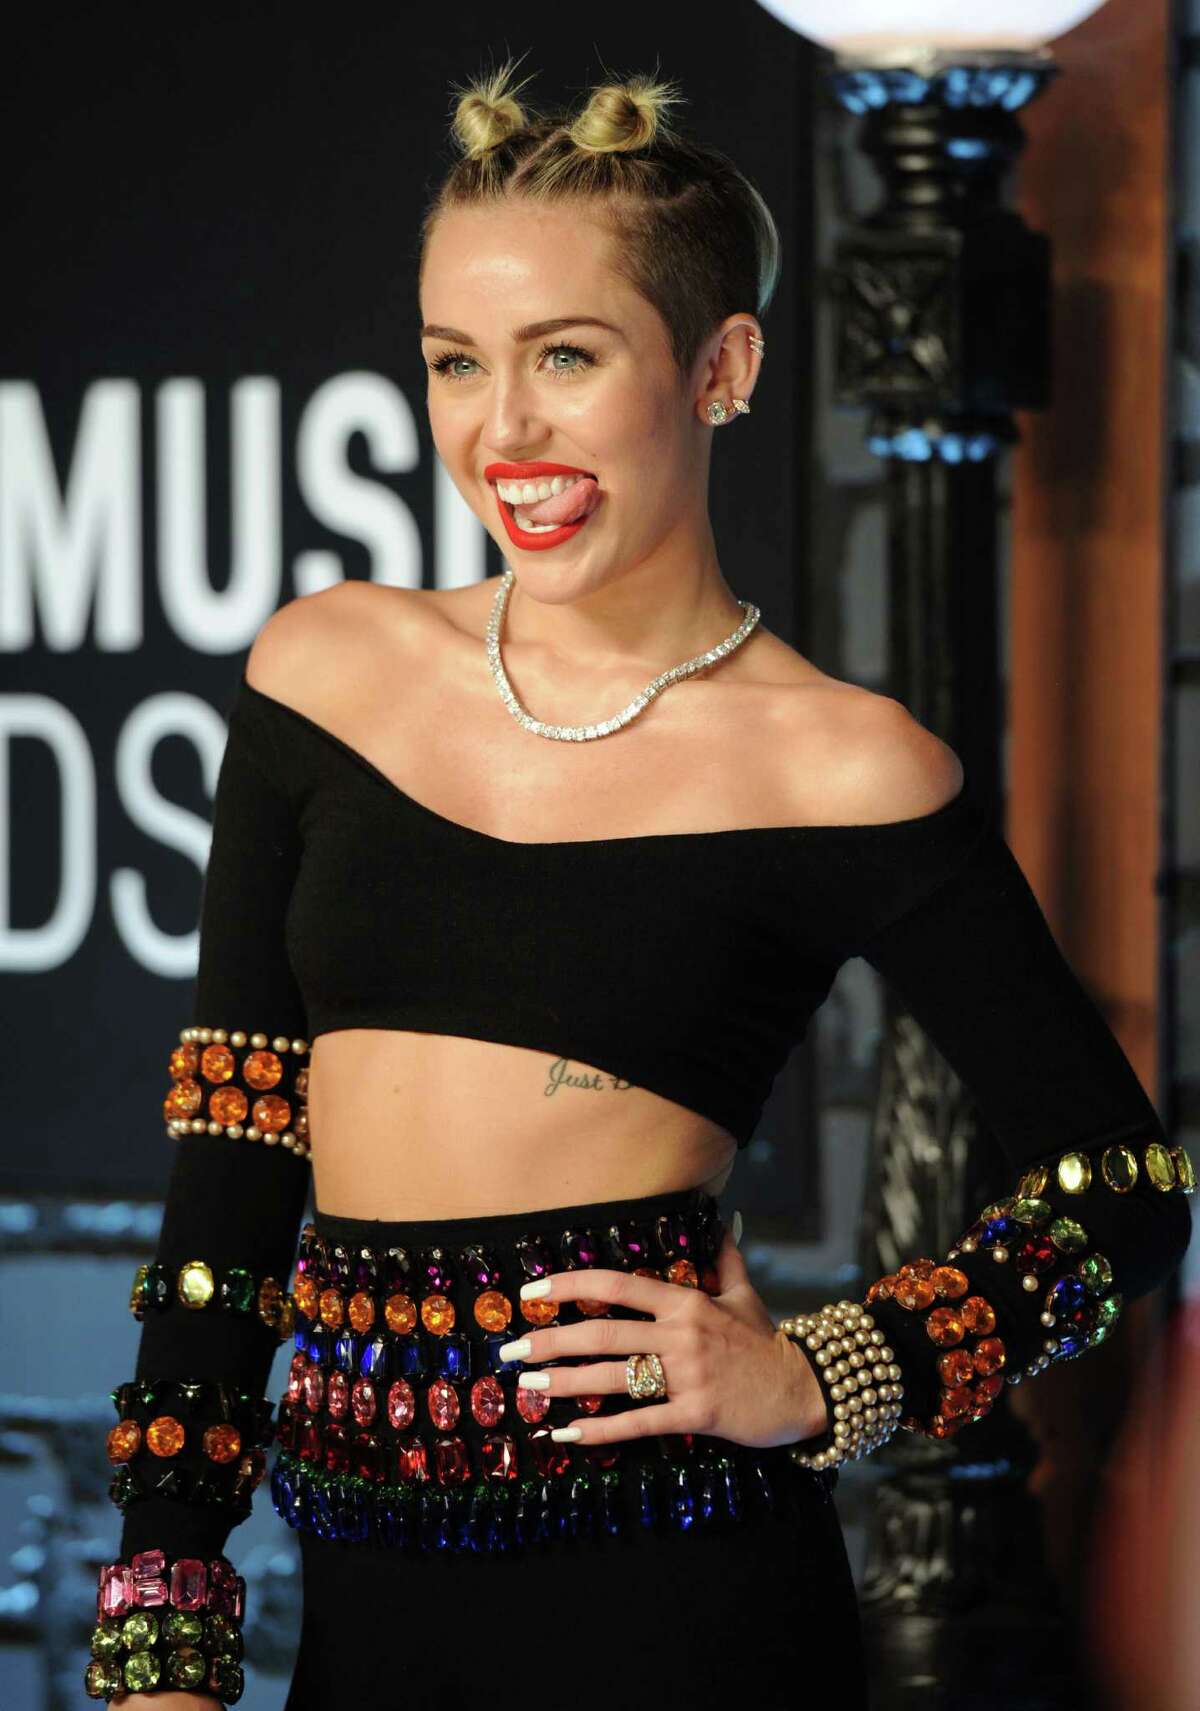 The world got more familiar than it wanted to with Miley Cyrus' tongue on Sunday at the MTV Video Music Awards. Here's a look at Miley and other Disney stars who are quite obviously all grown up.